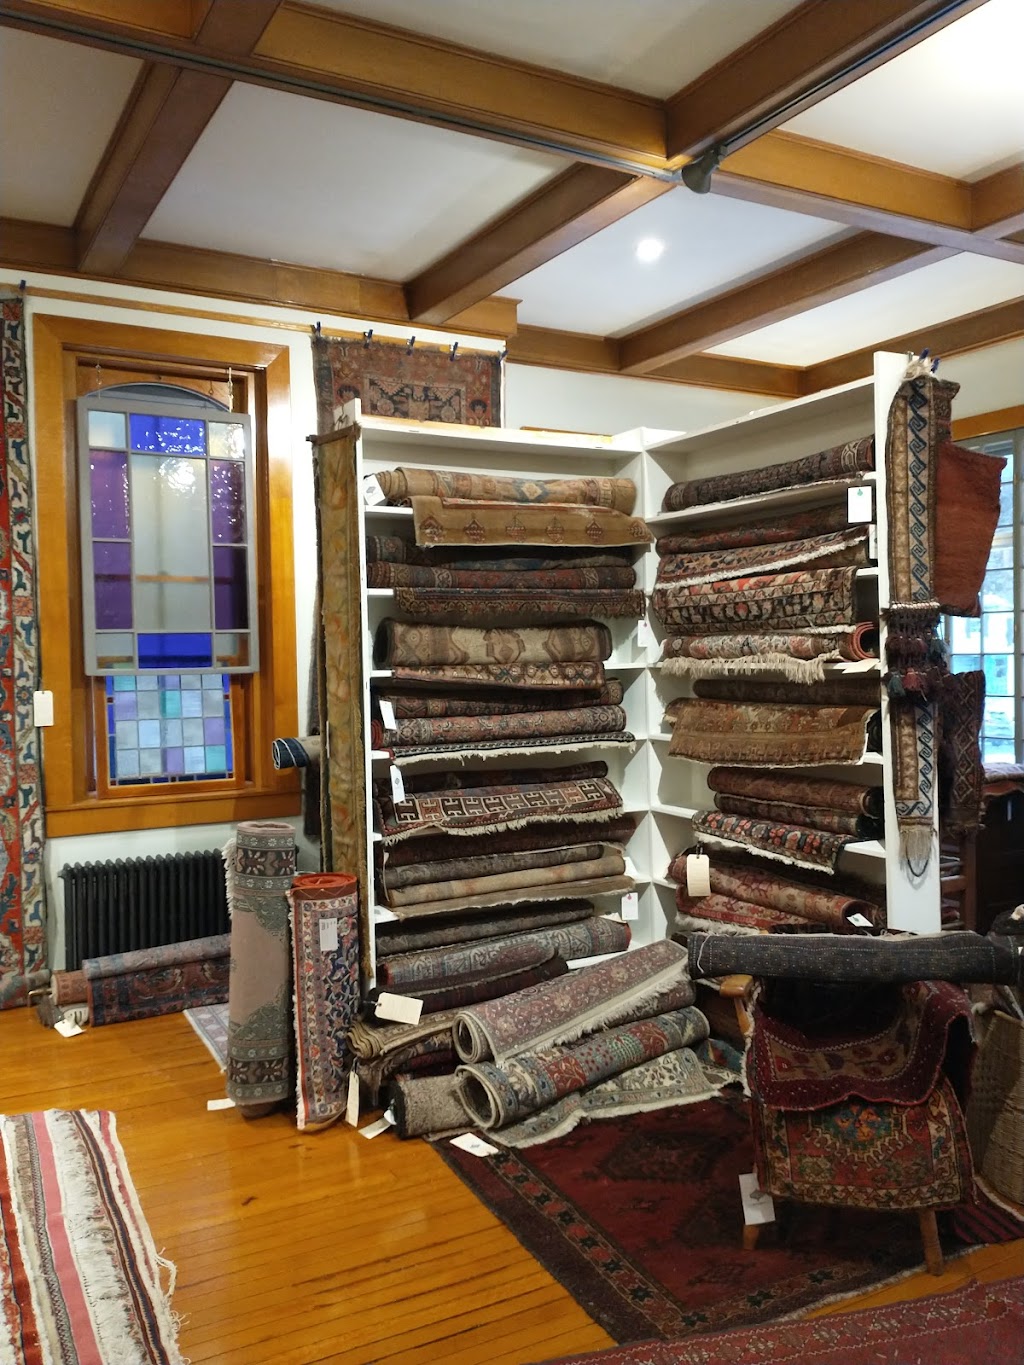 The Antique Knot | 74 Main St, Stamford, NY 12167 | Phone: (631) 338-4996